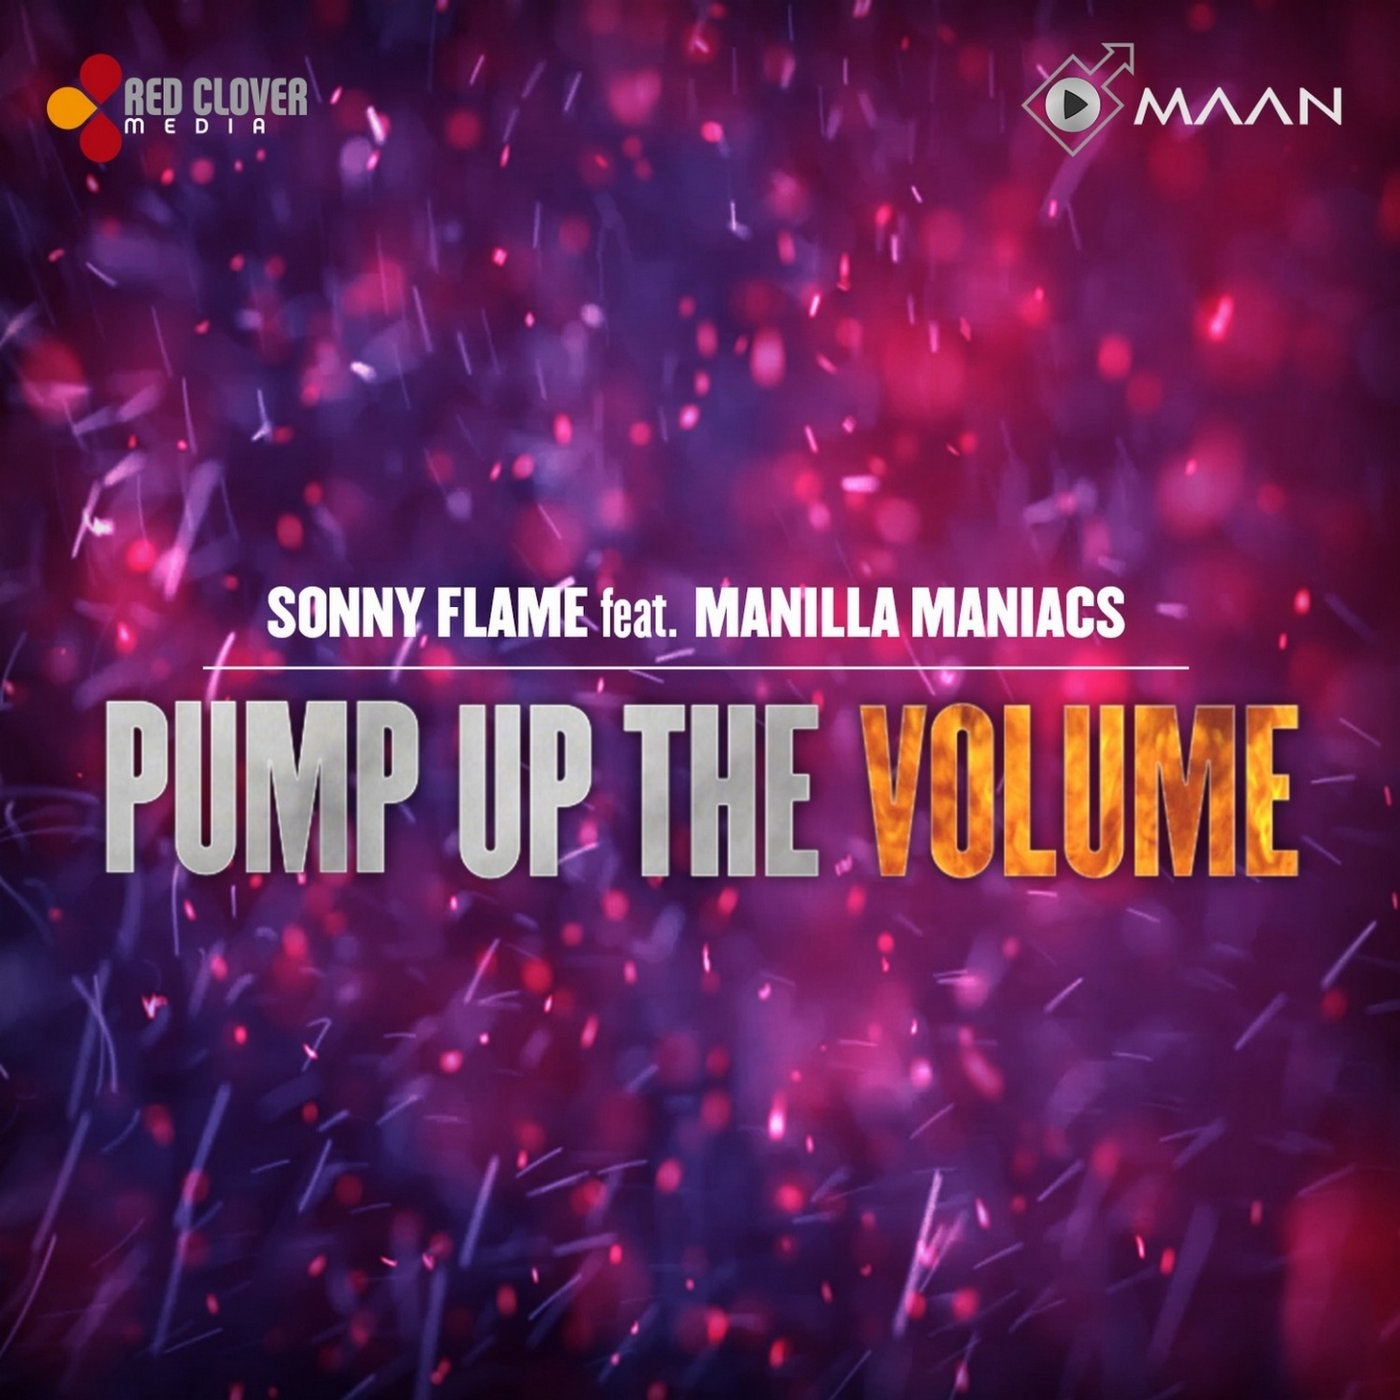 Pump up the Volume (feat. Manilla Maniacs)